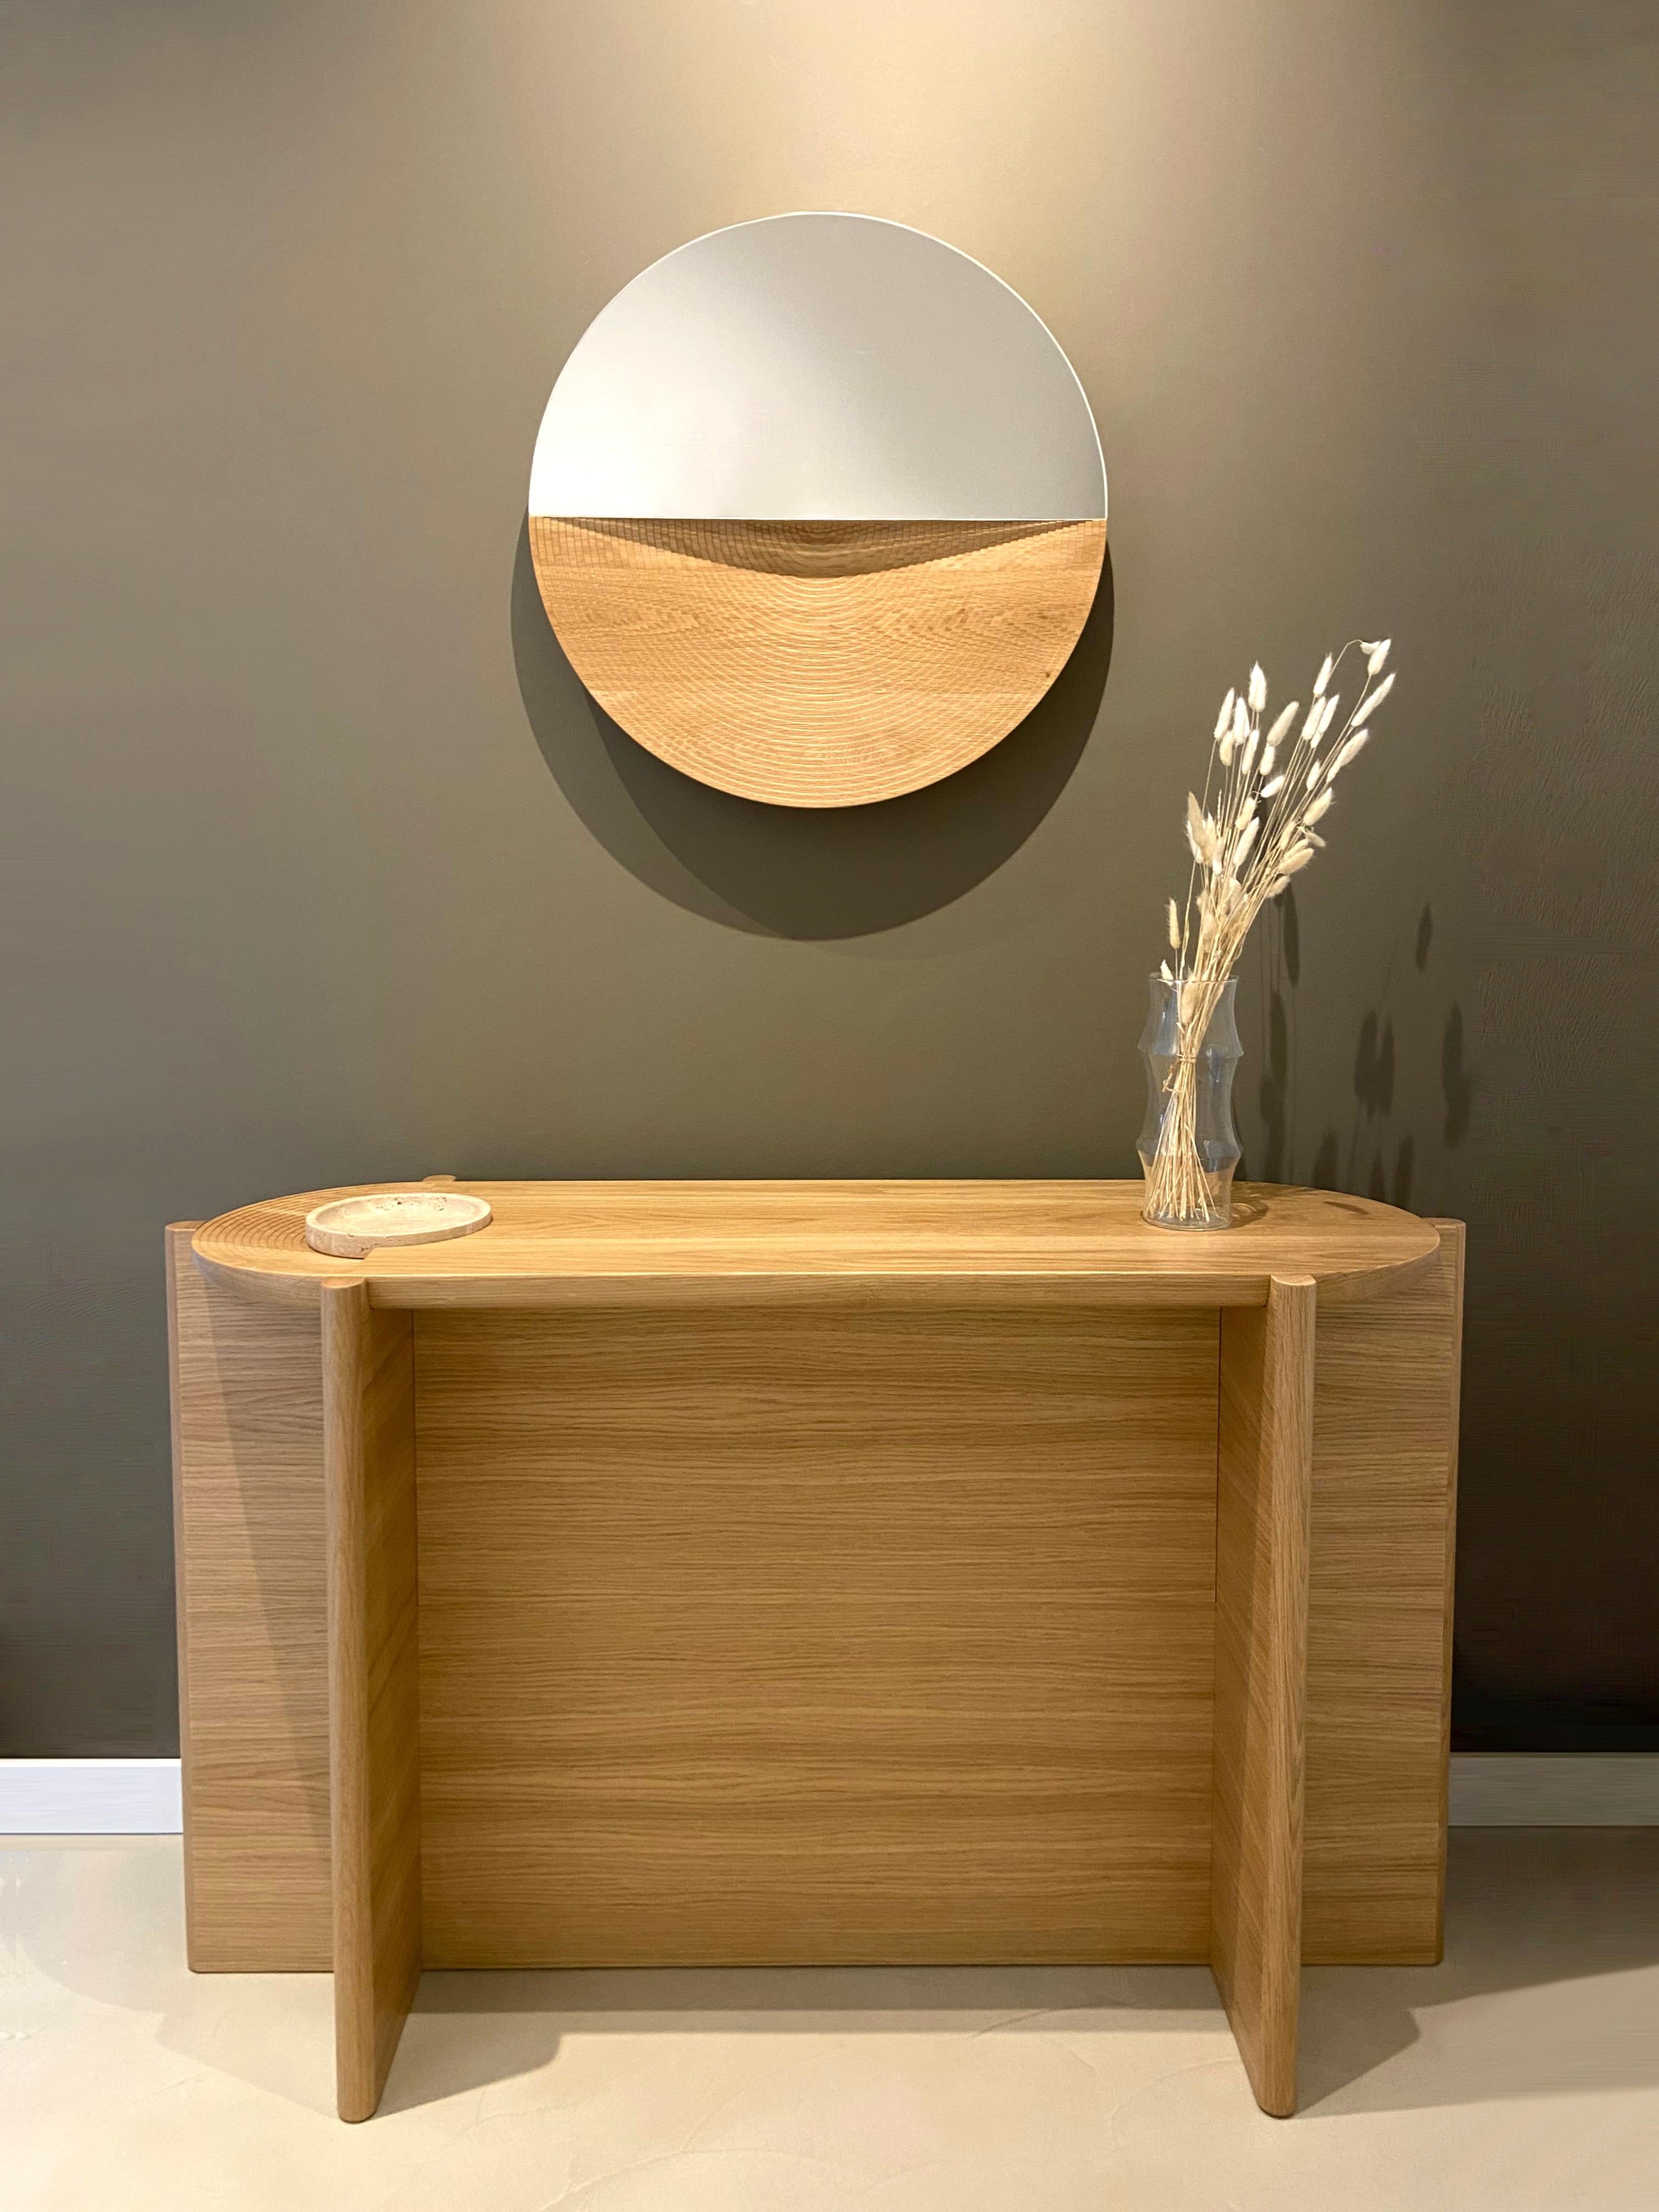 Arkhe console table is a graceful combination of functionality, simplicity and sculptural posture. The natural beauty of oak and travertine, exquisite craftsmanship and the inspiration coming from stunning amphitheaters of old times gives this